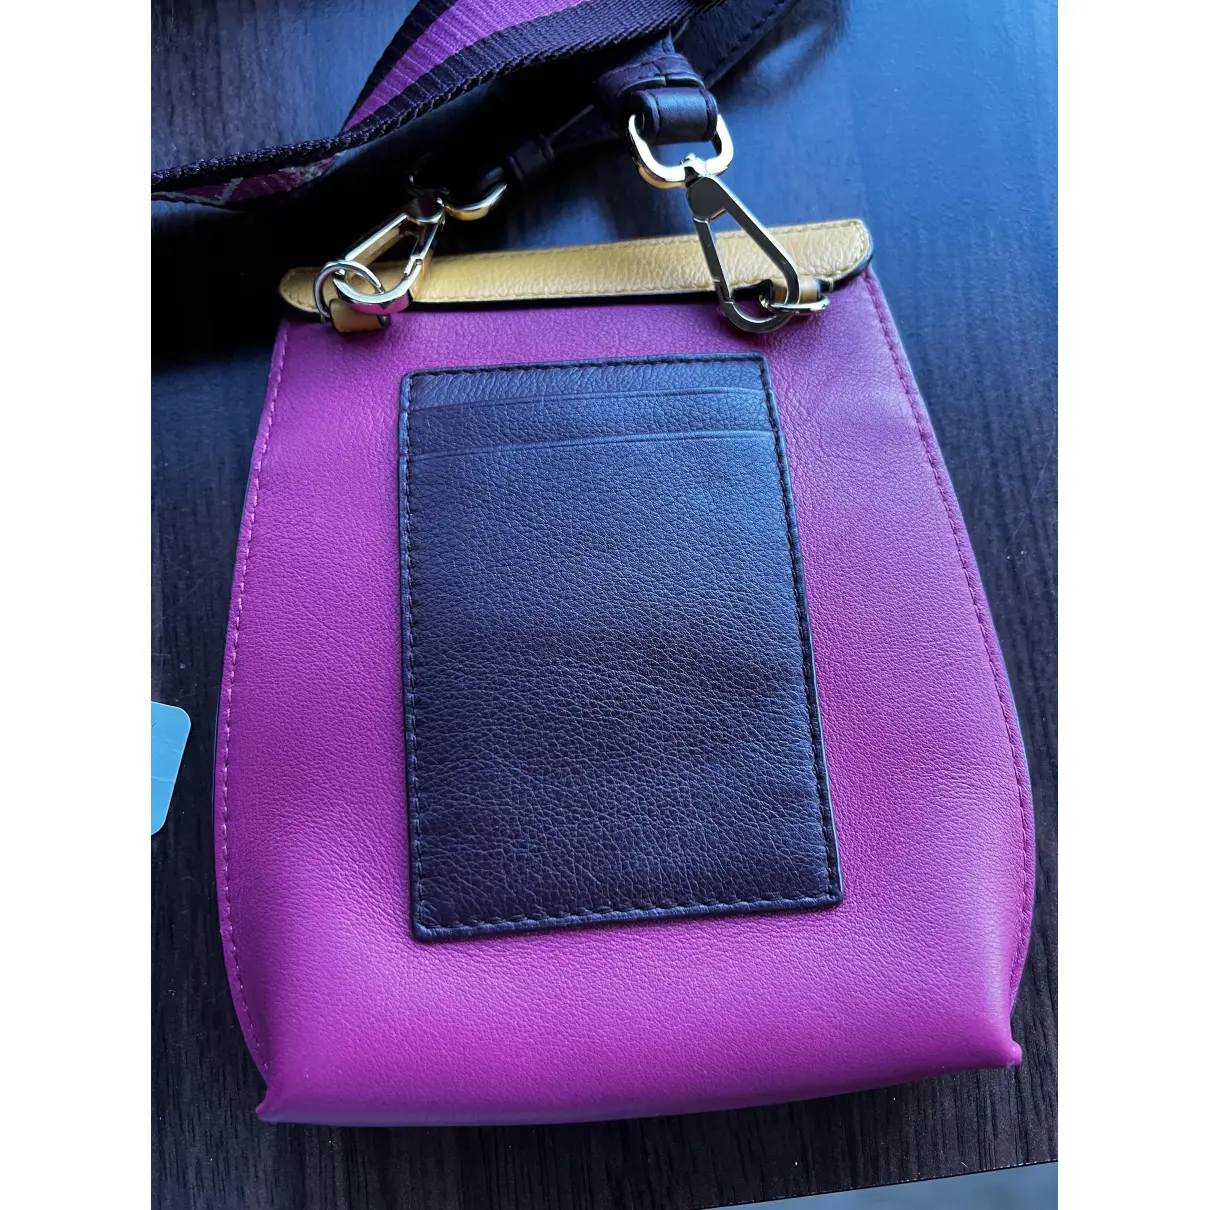 Buy Strathberry Leather crossbody bag online